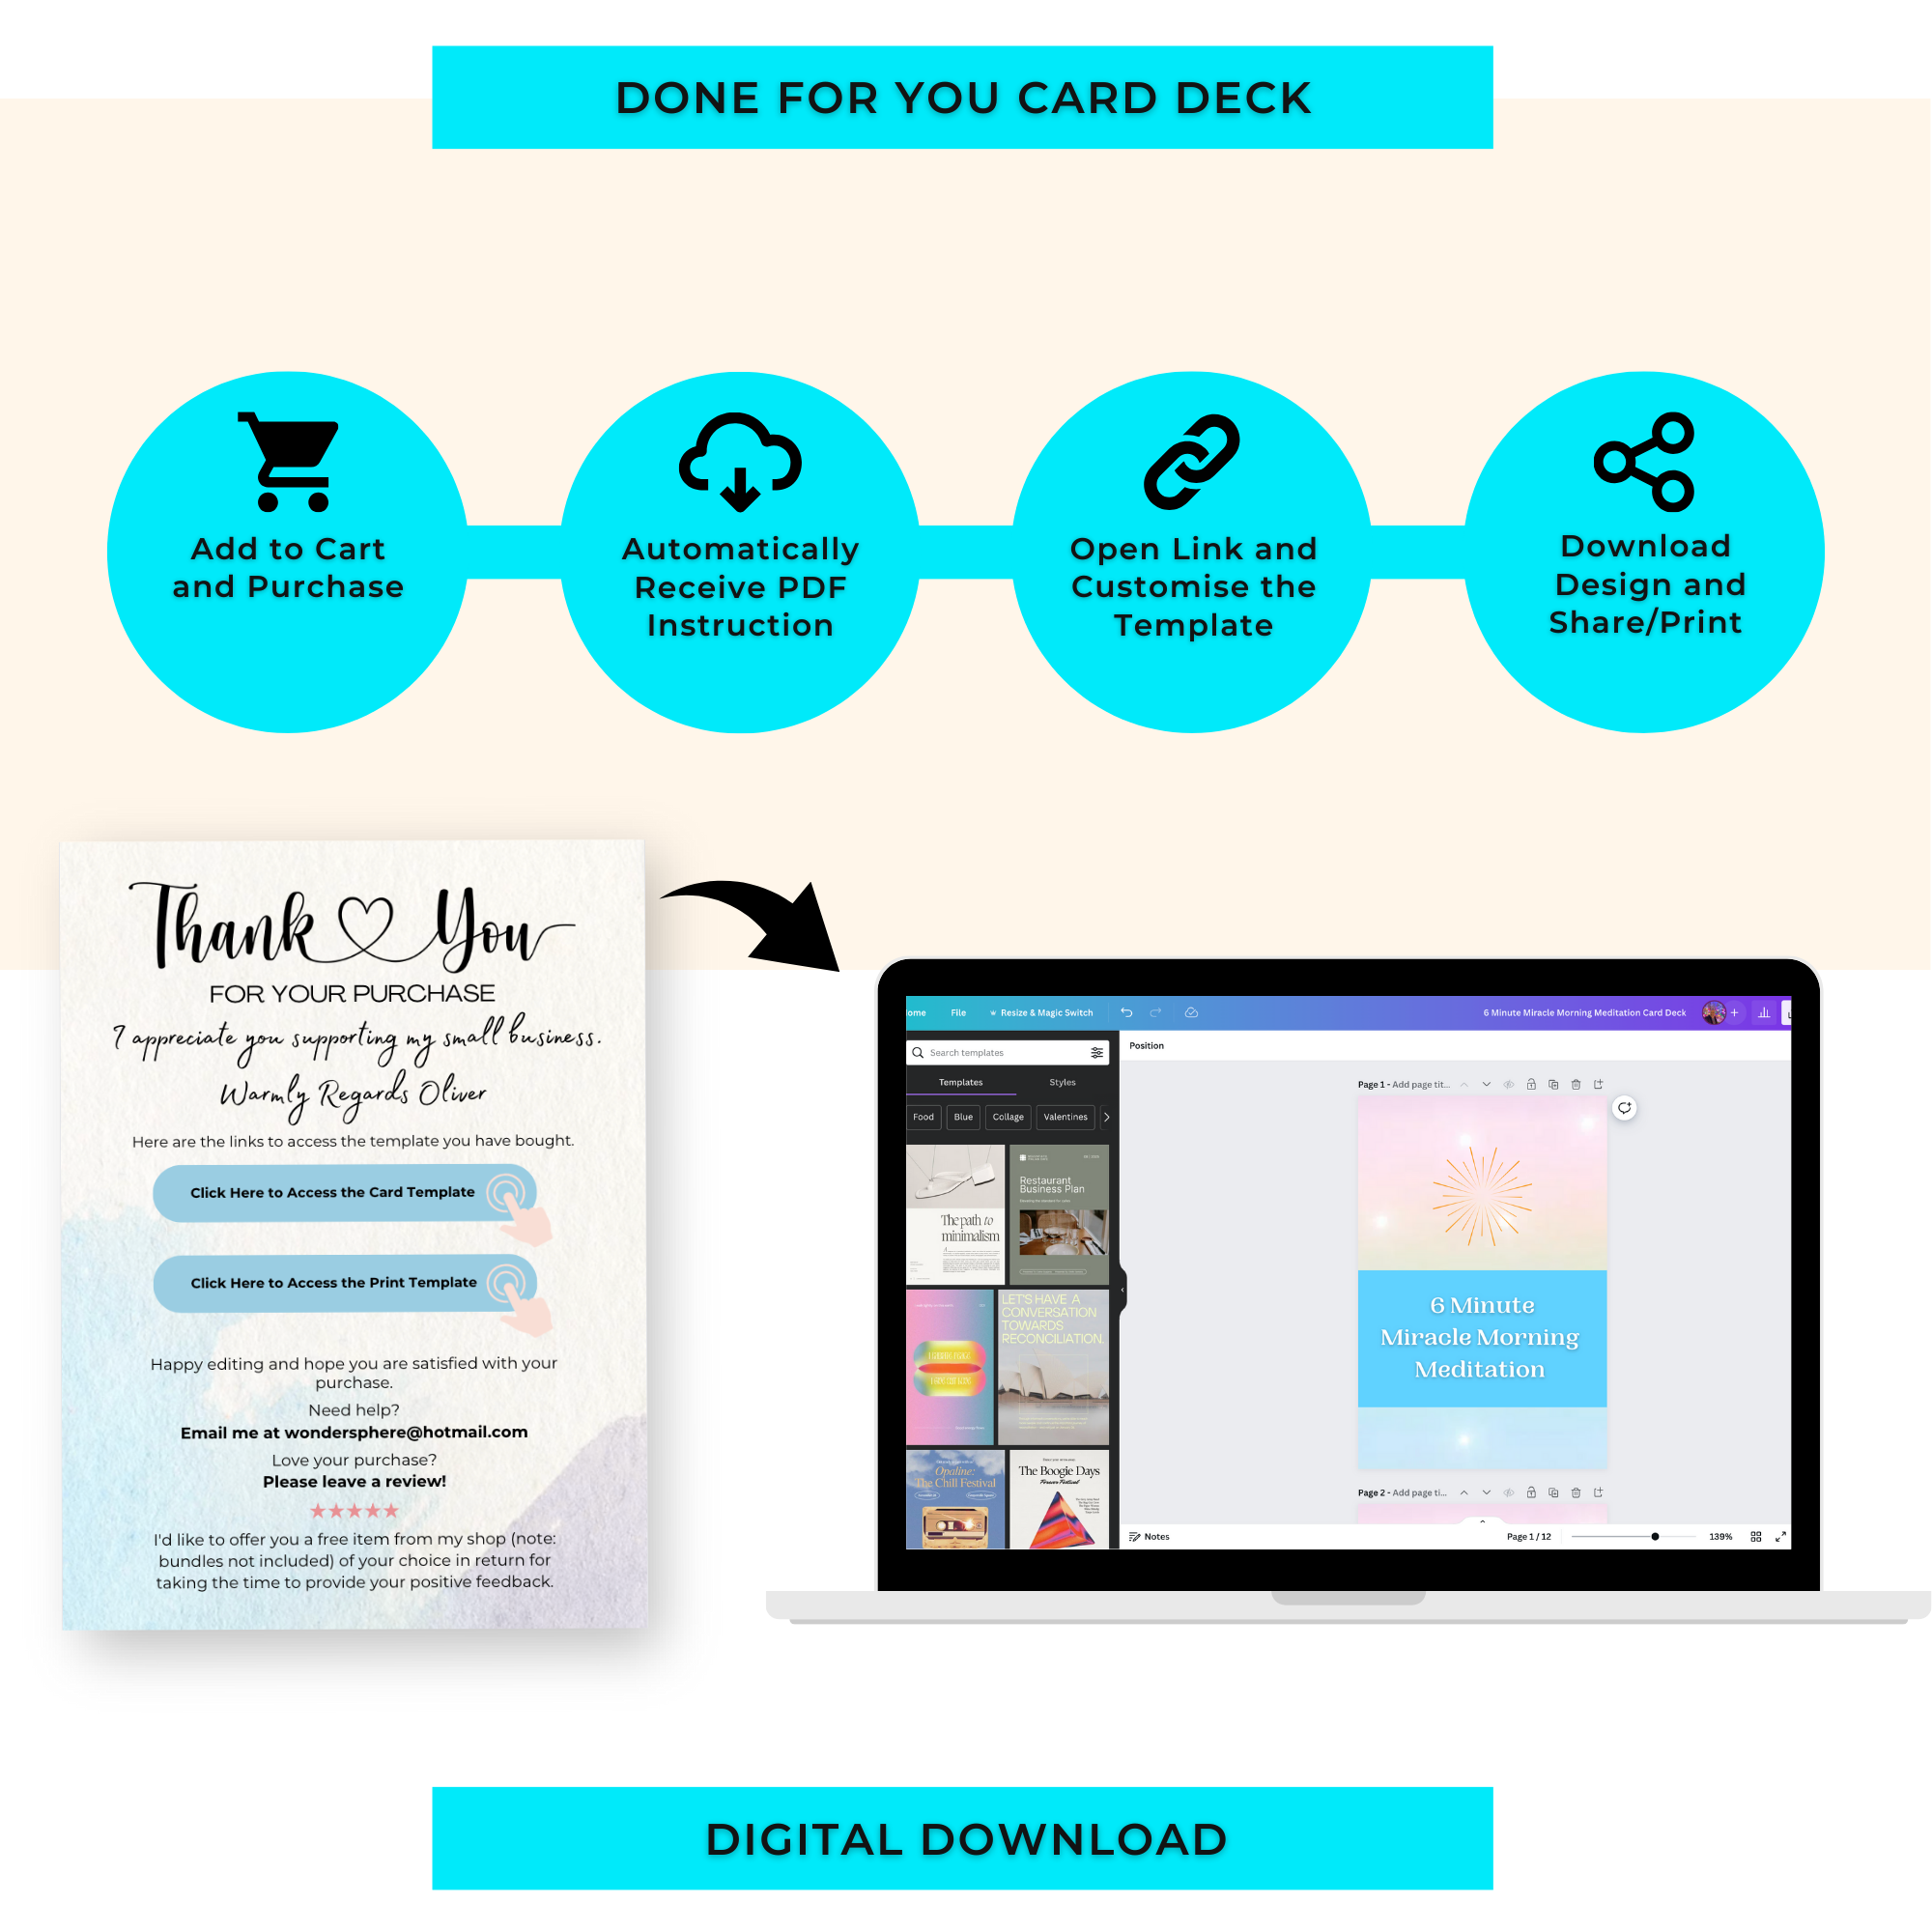 6 Minute Miracle Morning Meditation Prompts | Editable 12 Card Deck in Canva | Commercial Use